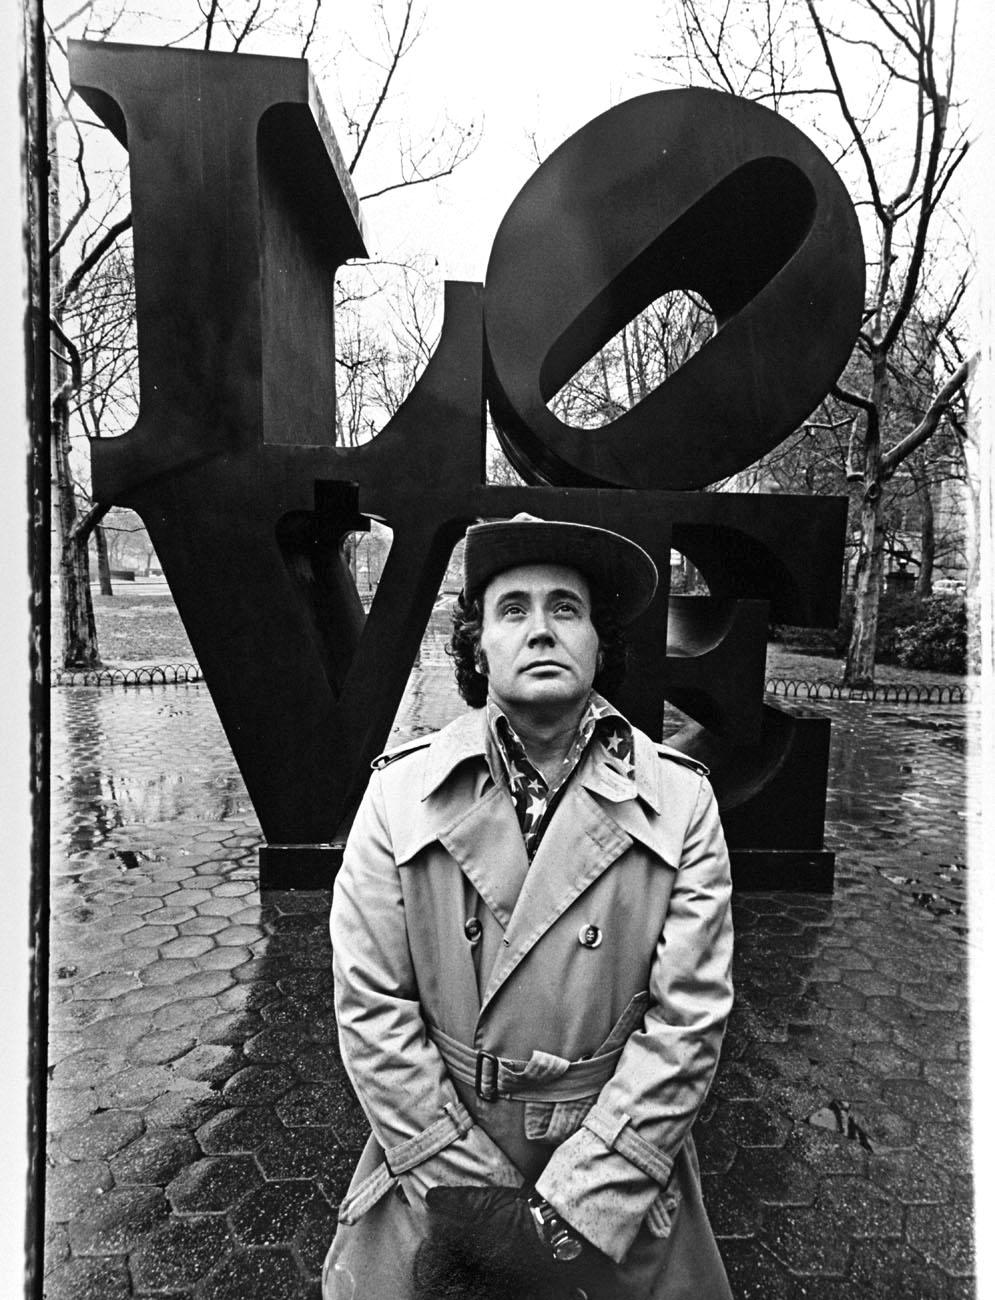 Jack Mitchell Black and White Photograph -   Artist Robert Indiana with his LOVE sculpture in Central Park, NYC